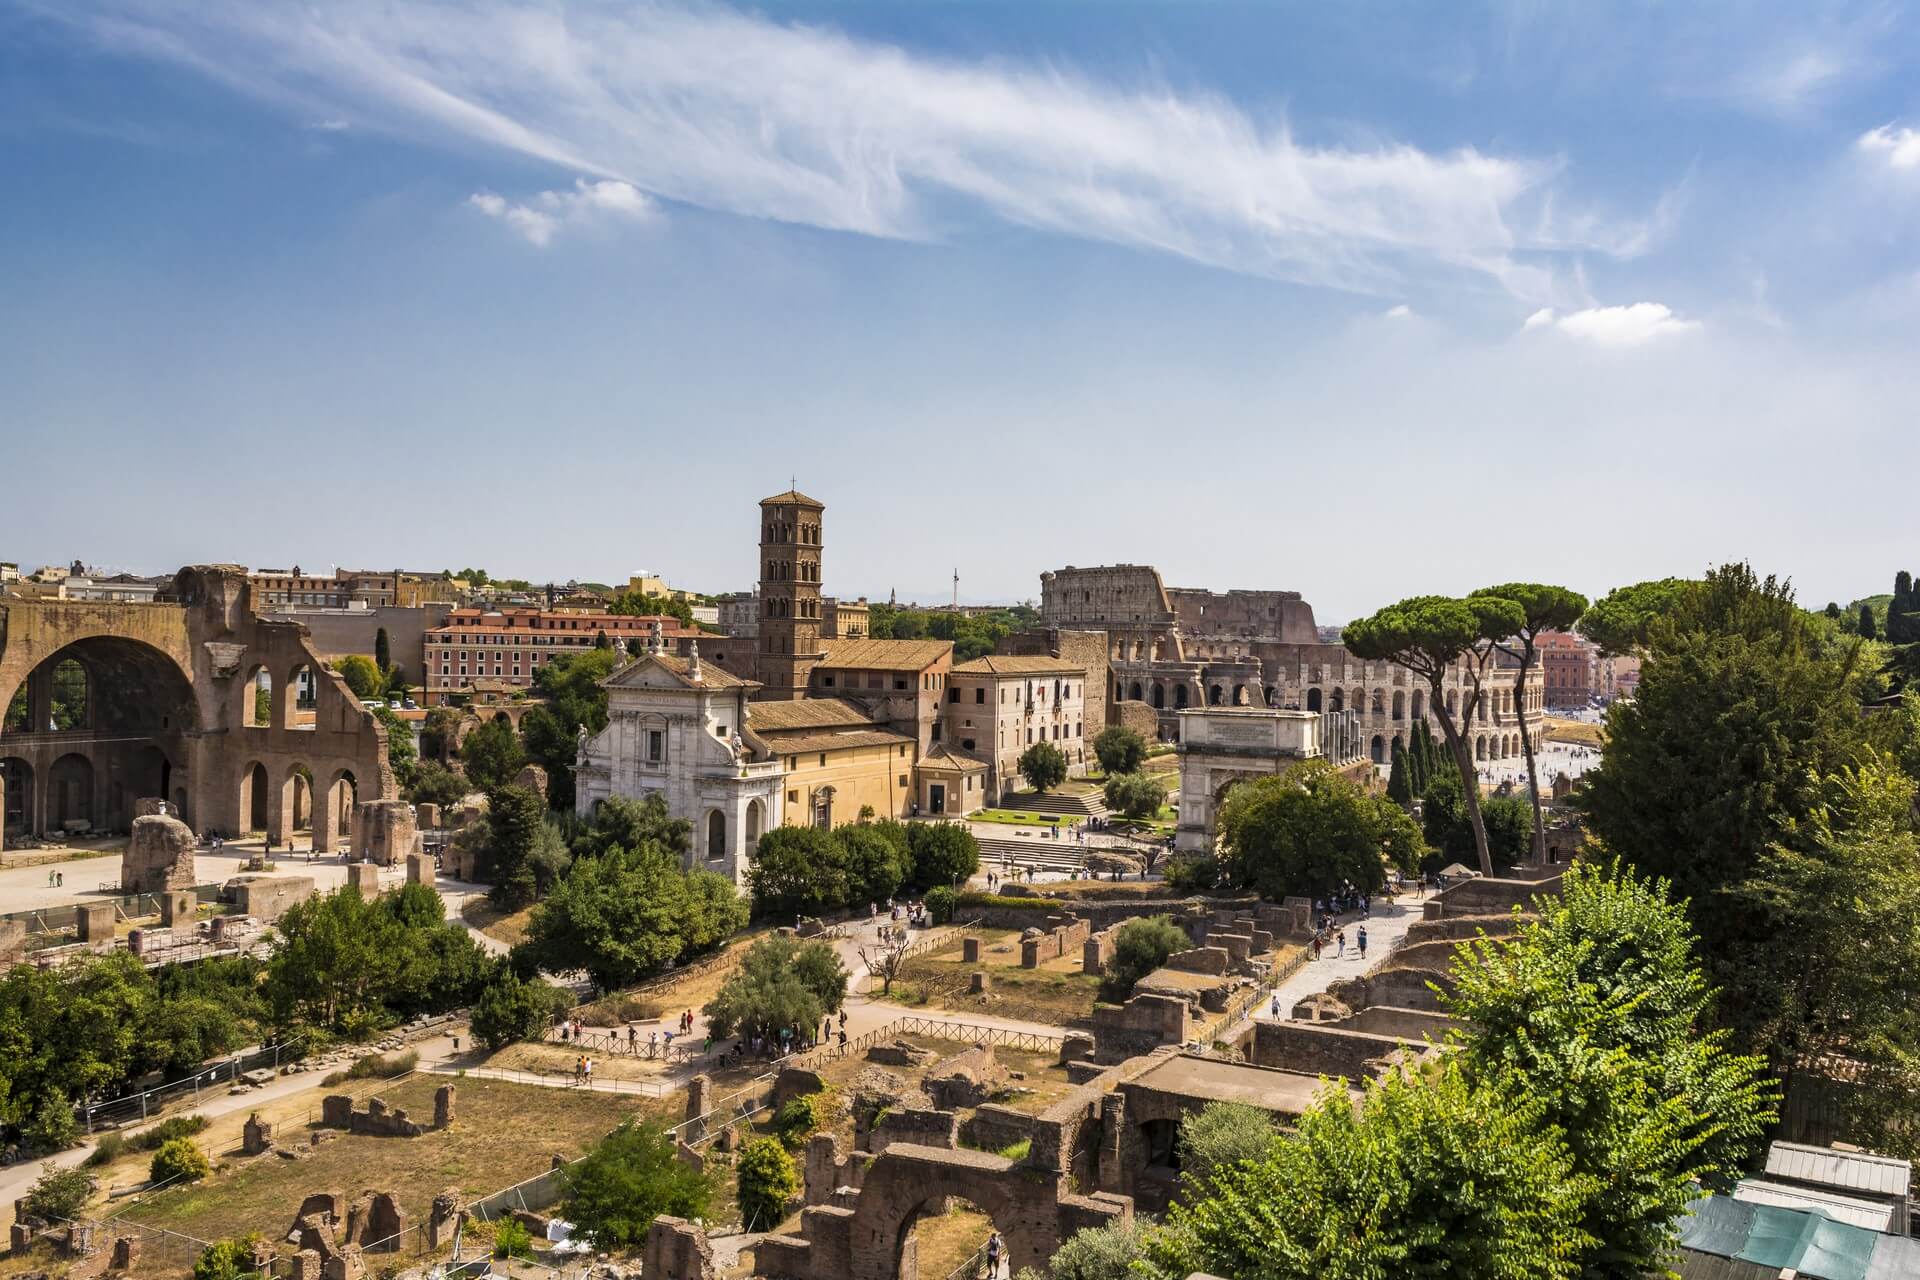 Panoramic view the Colosseum (Coliseum) and Roman Forum from Palantine hill, Rome, Italy. The Roman Forum is one of the main tourist attractions of Rome.
